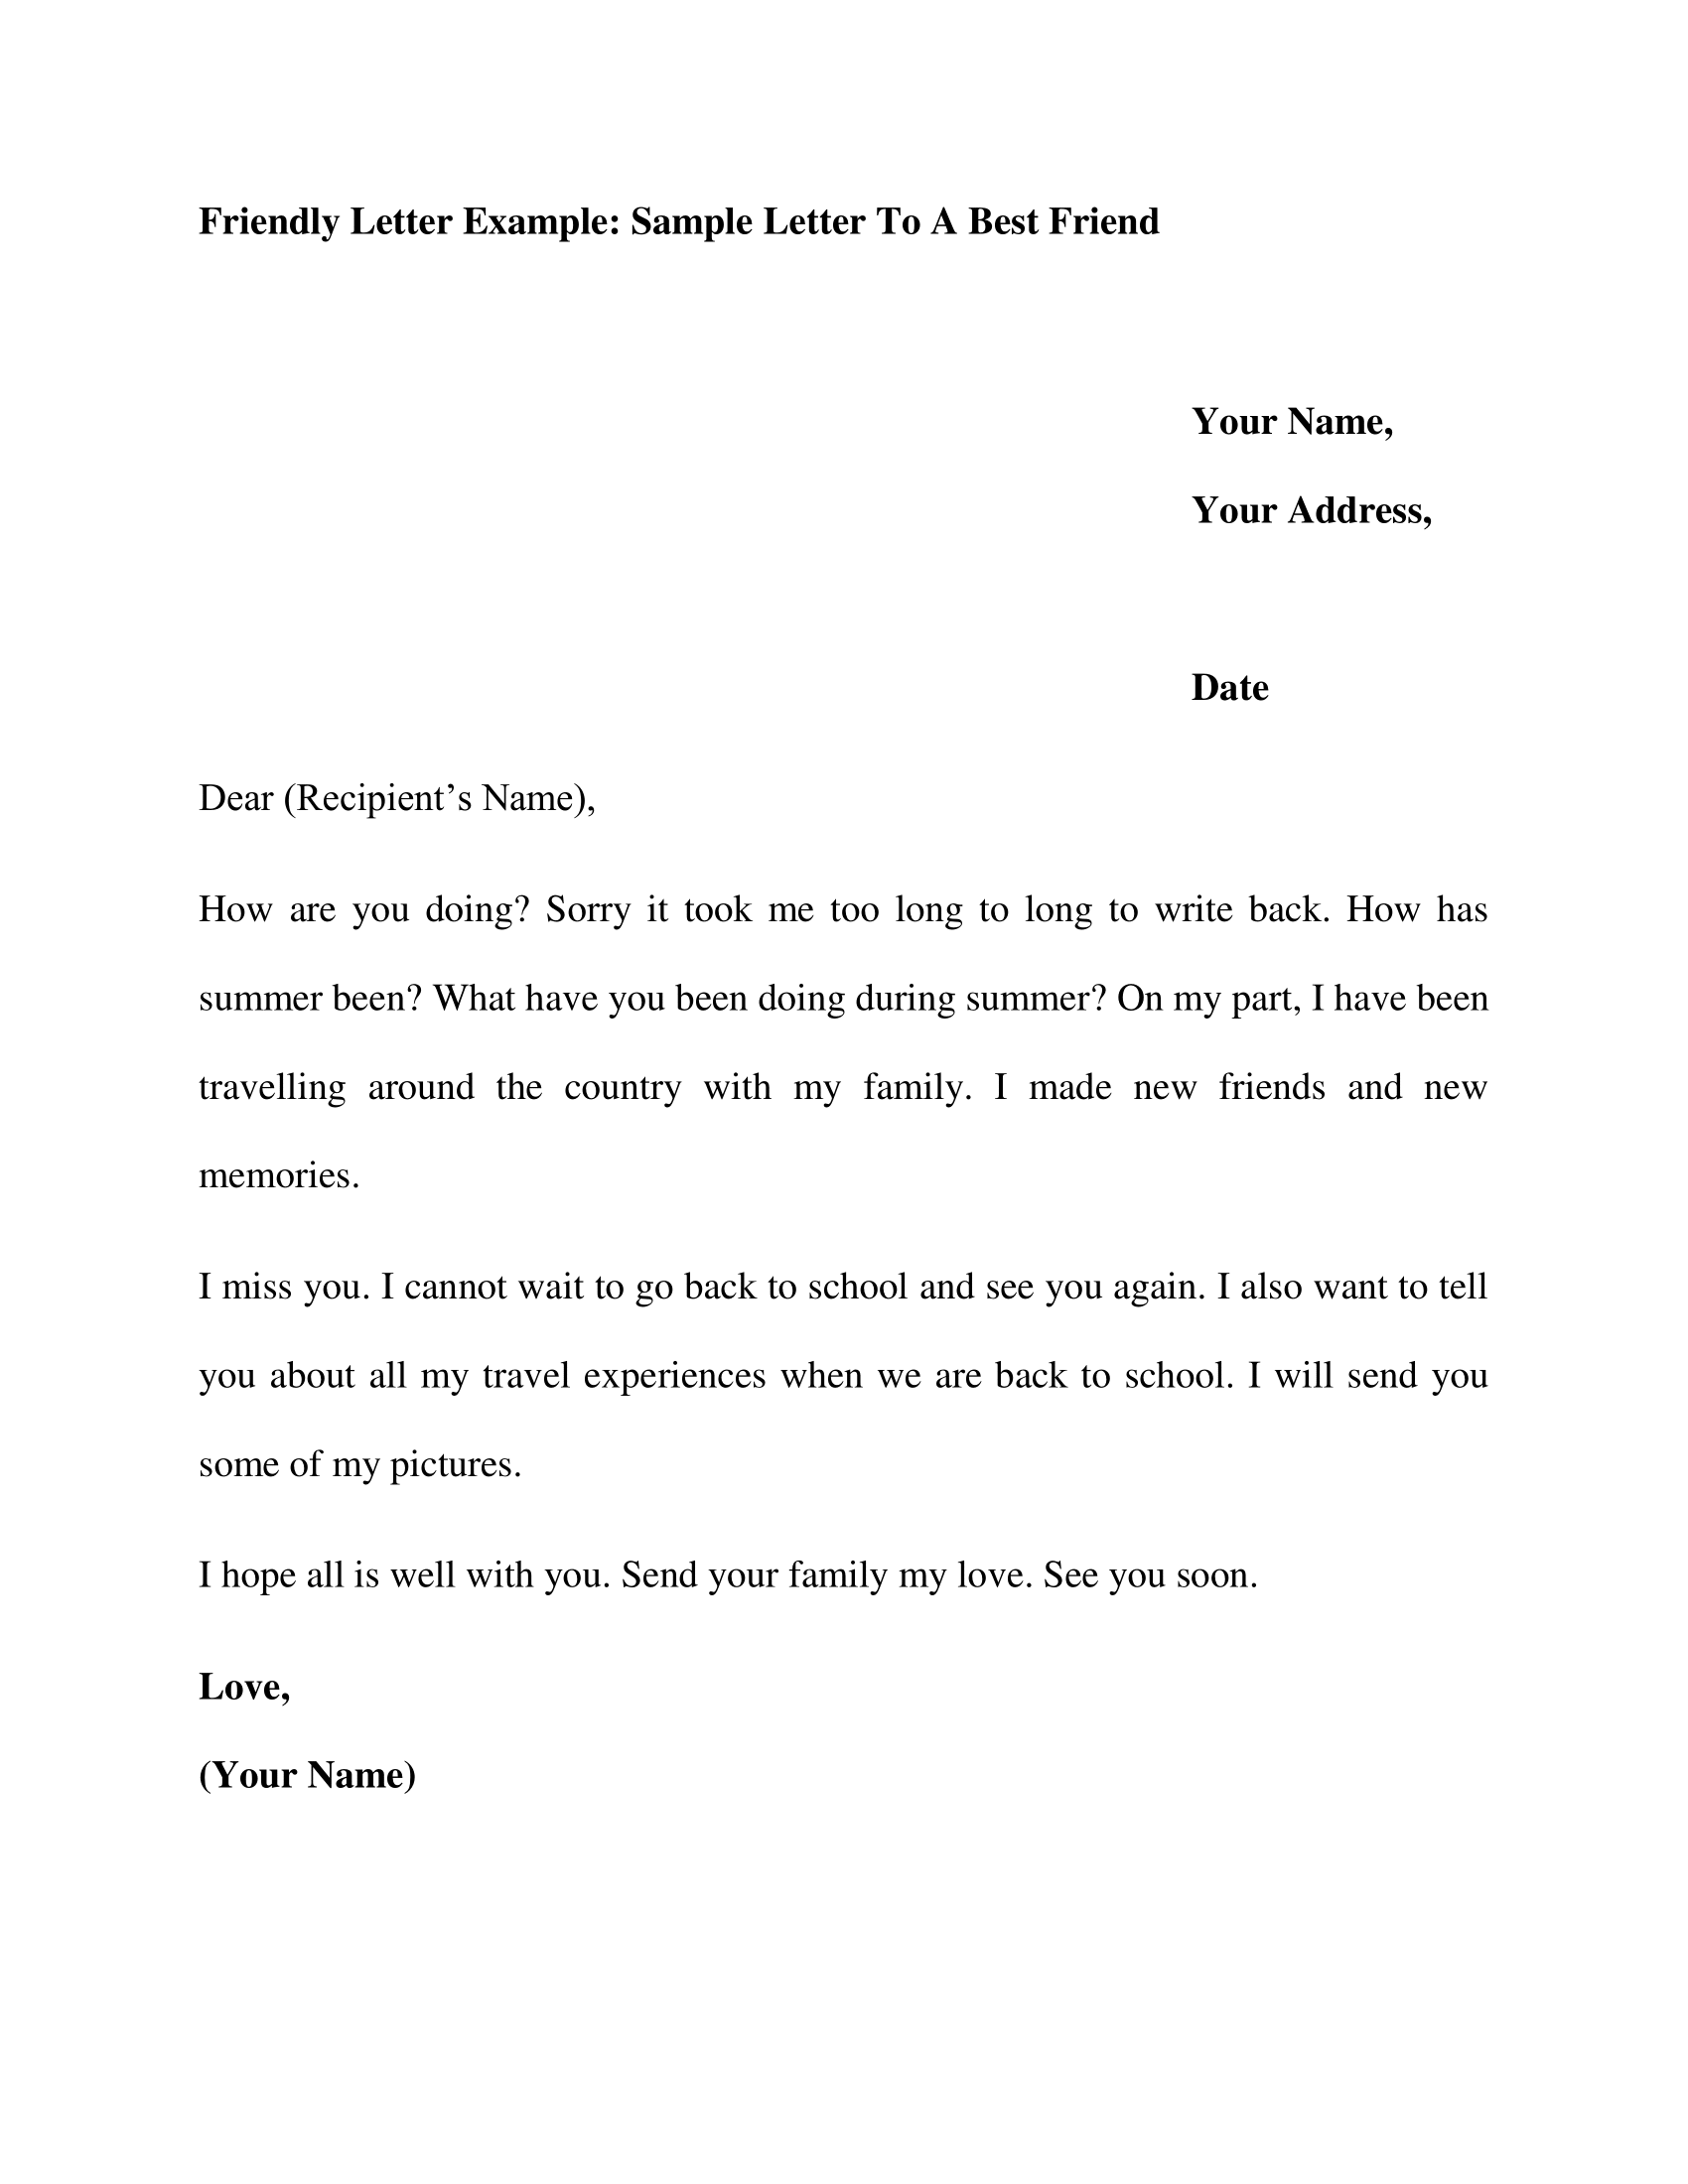 Letter Example For A Friend